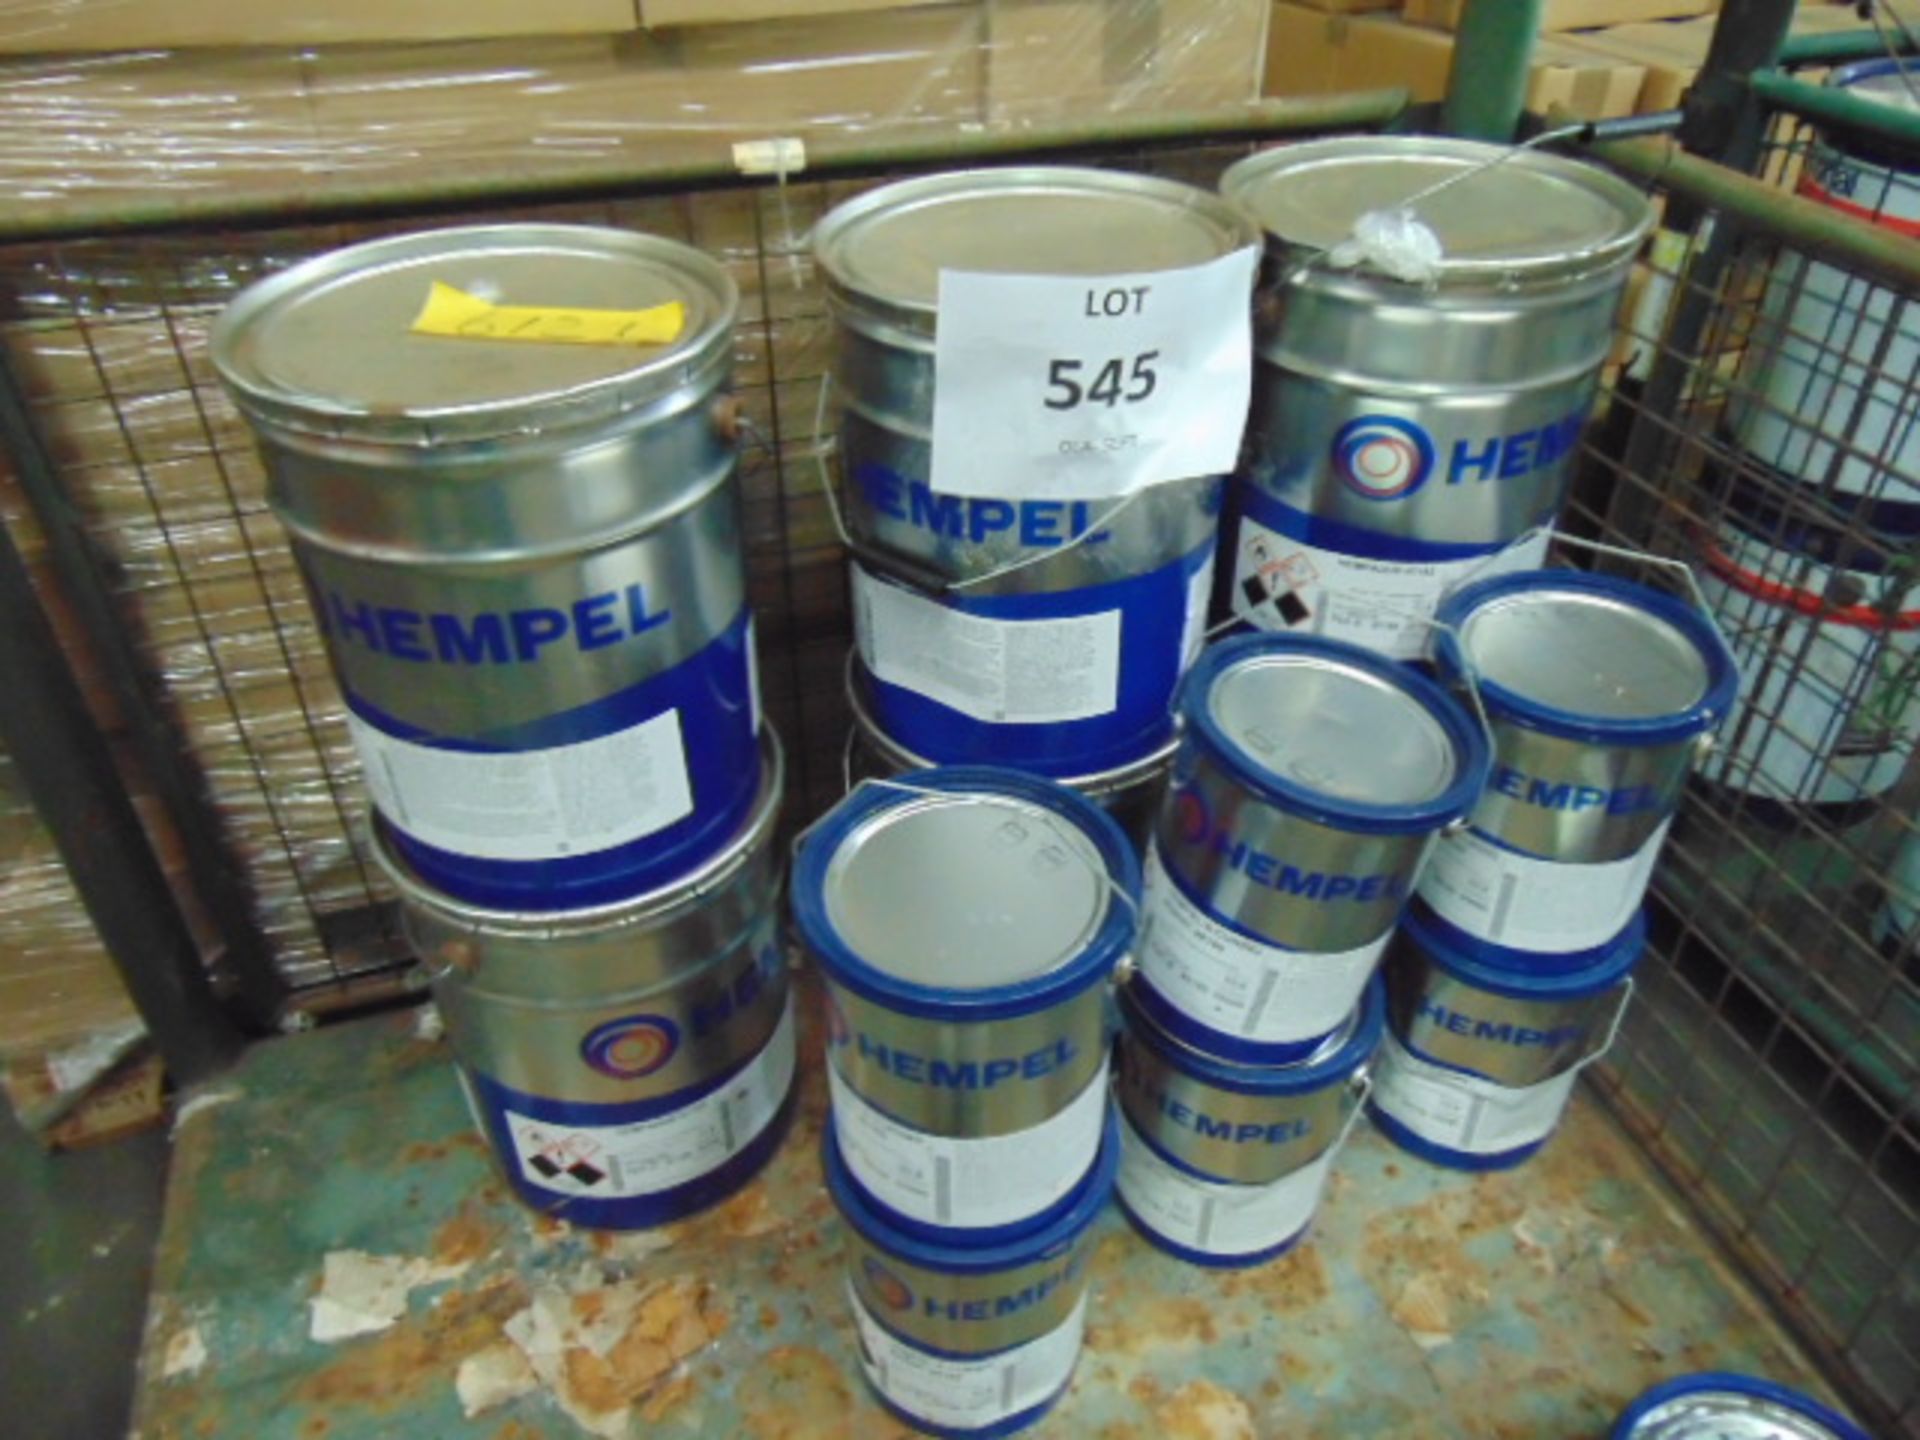 6x 17.5 litre Drums of Hempels 47182 Gray anti corrosive 2 pack Gray paint